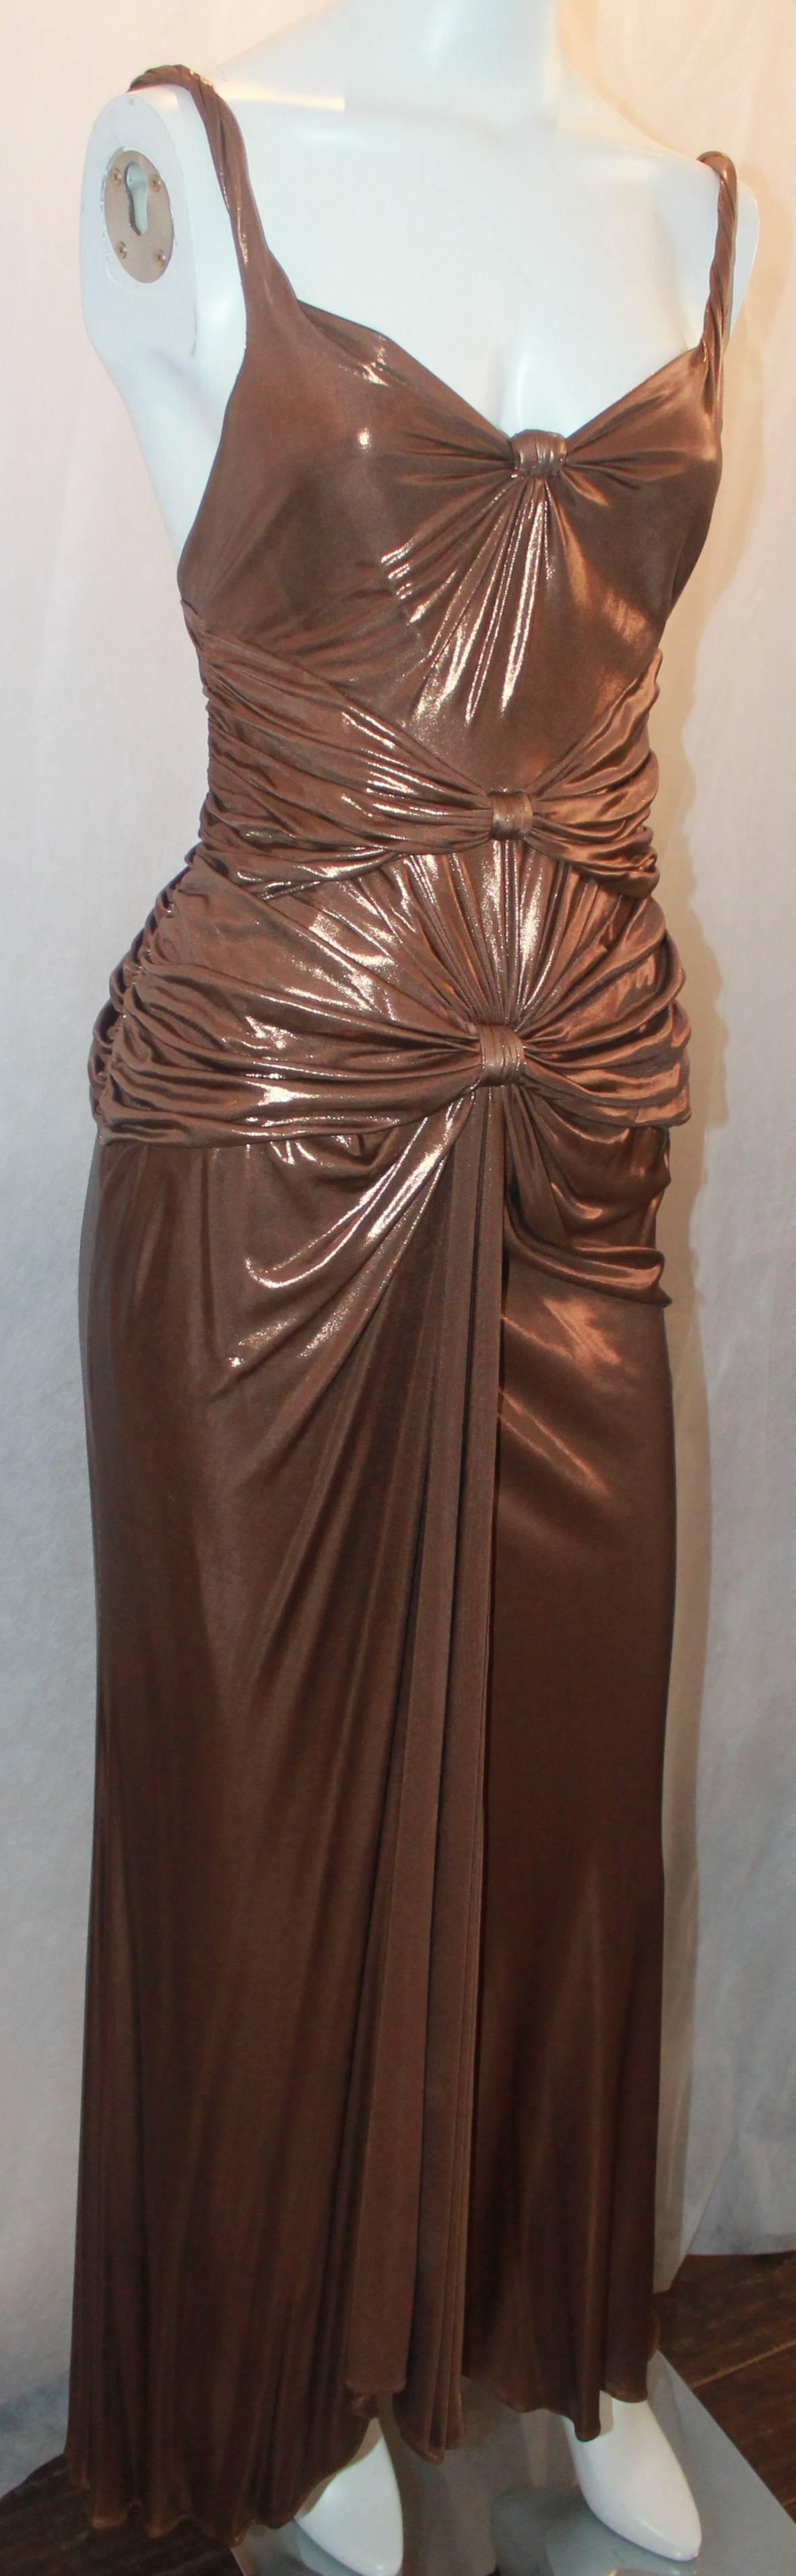 Emanuel Ungaro  Bronze Silk Lame Ruched Gown - S. This gorgeous gown is in excellent condition and has 3 ruched gatherings in the front with spaghetti straps. The gown has a draped look making it look very exotic.

Measurements:
Bust-31